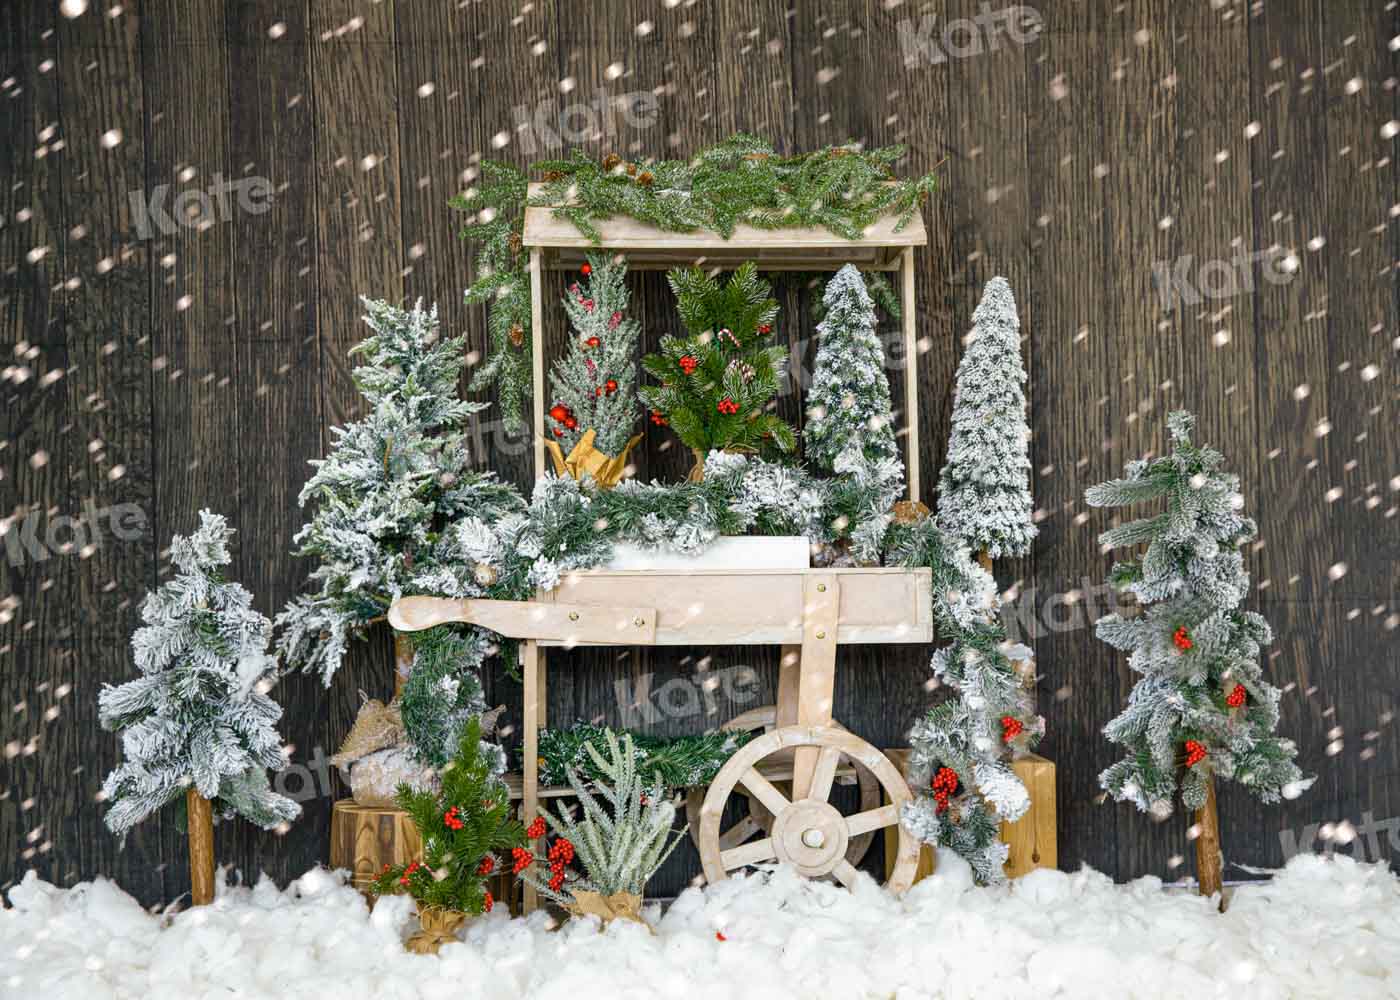 Kate Christmas Tree Backdrop Winter Snow Designed by Emetselch